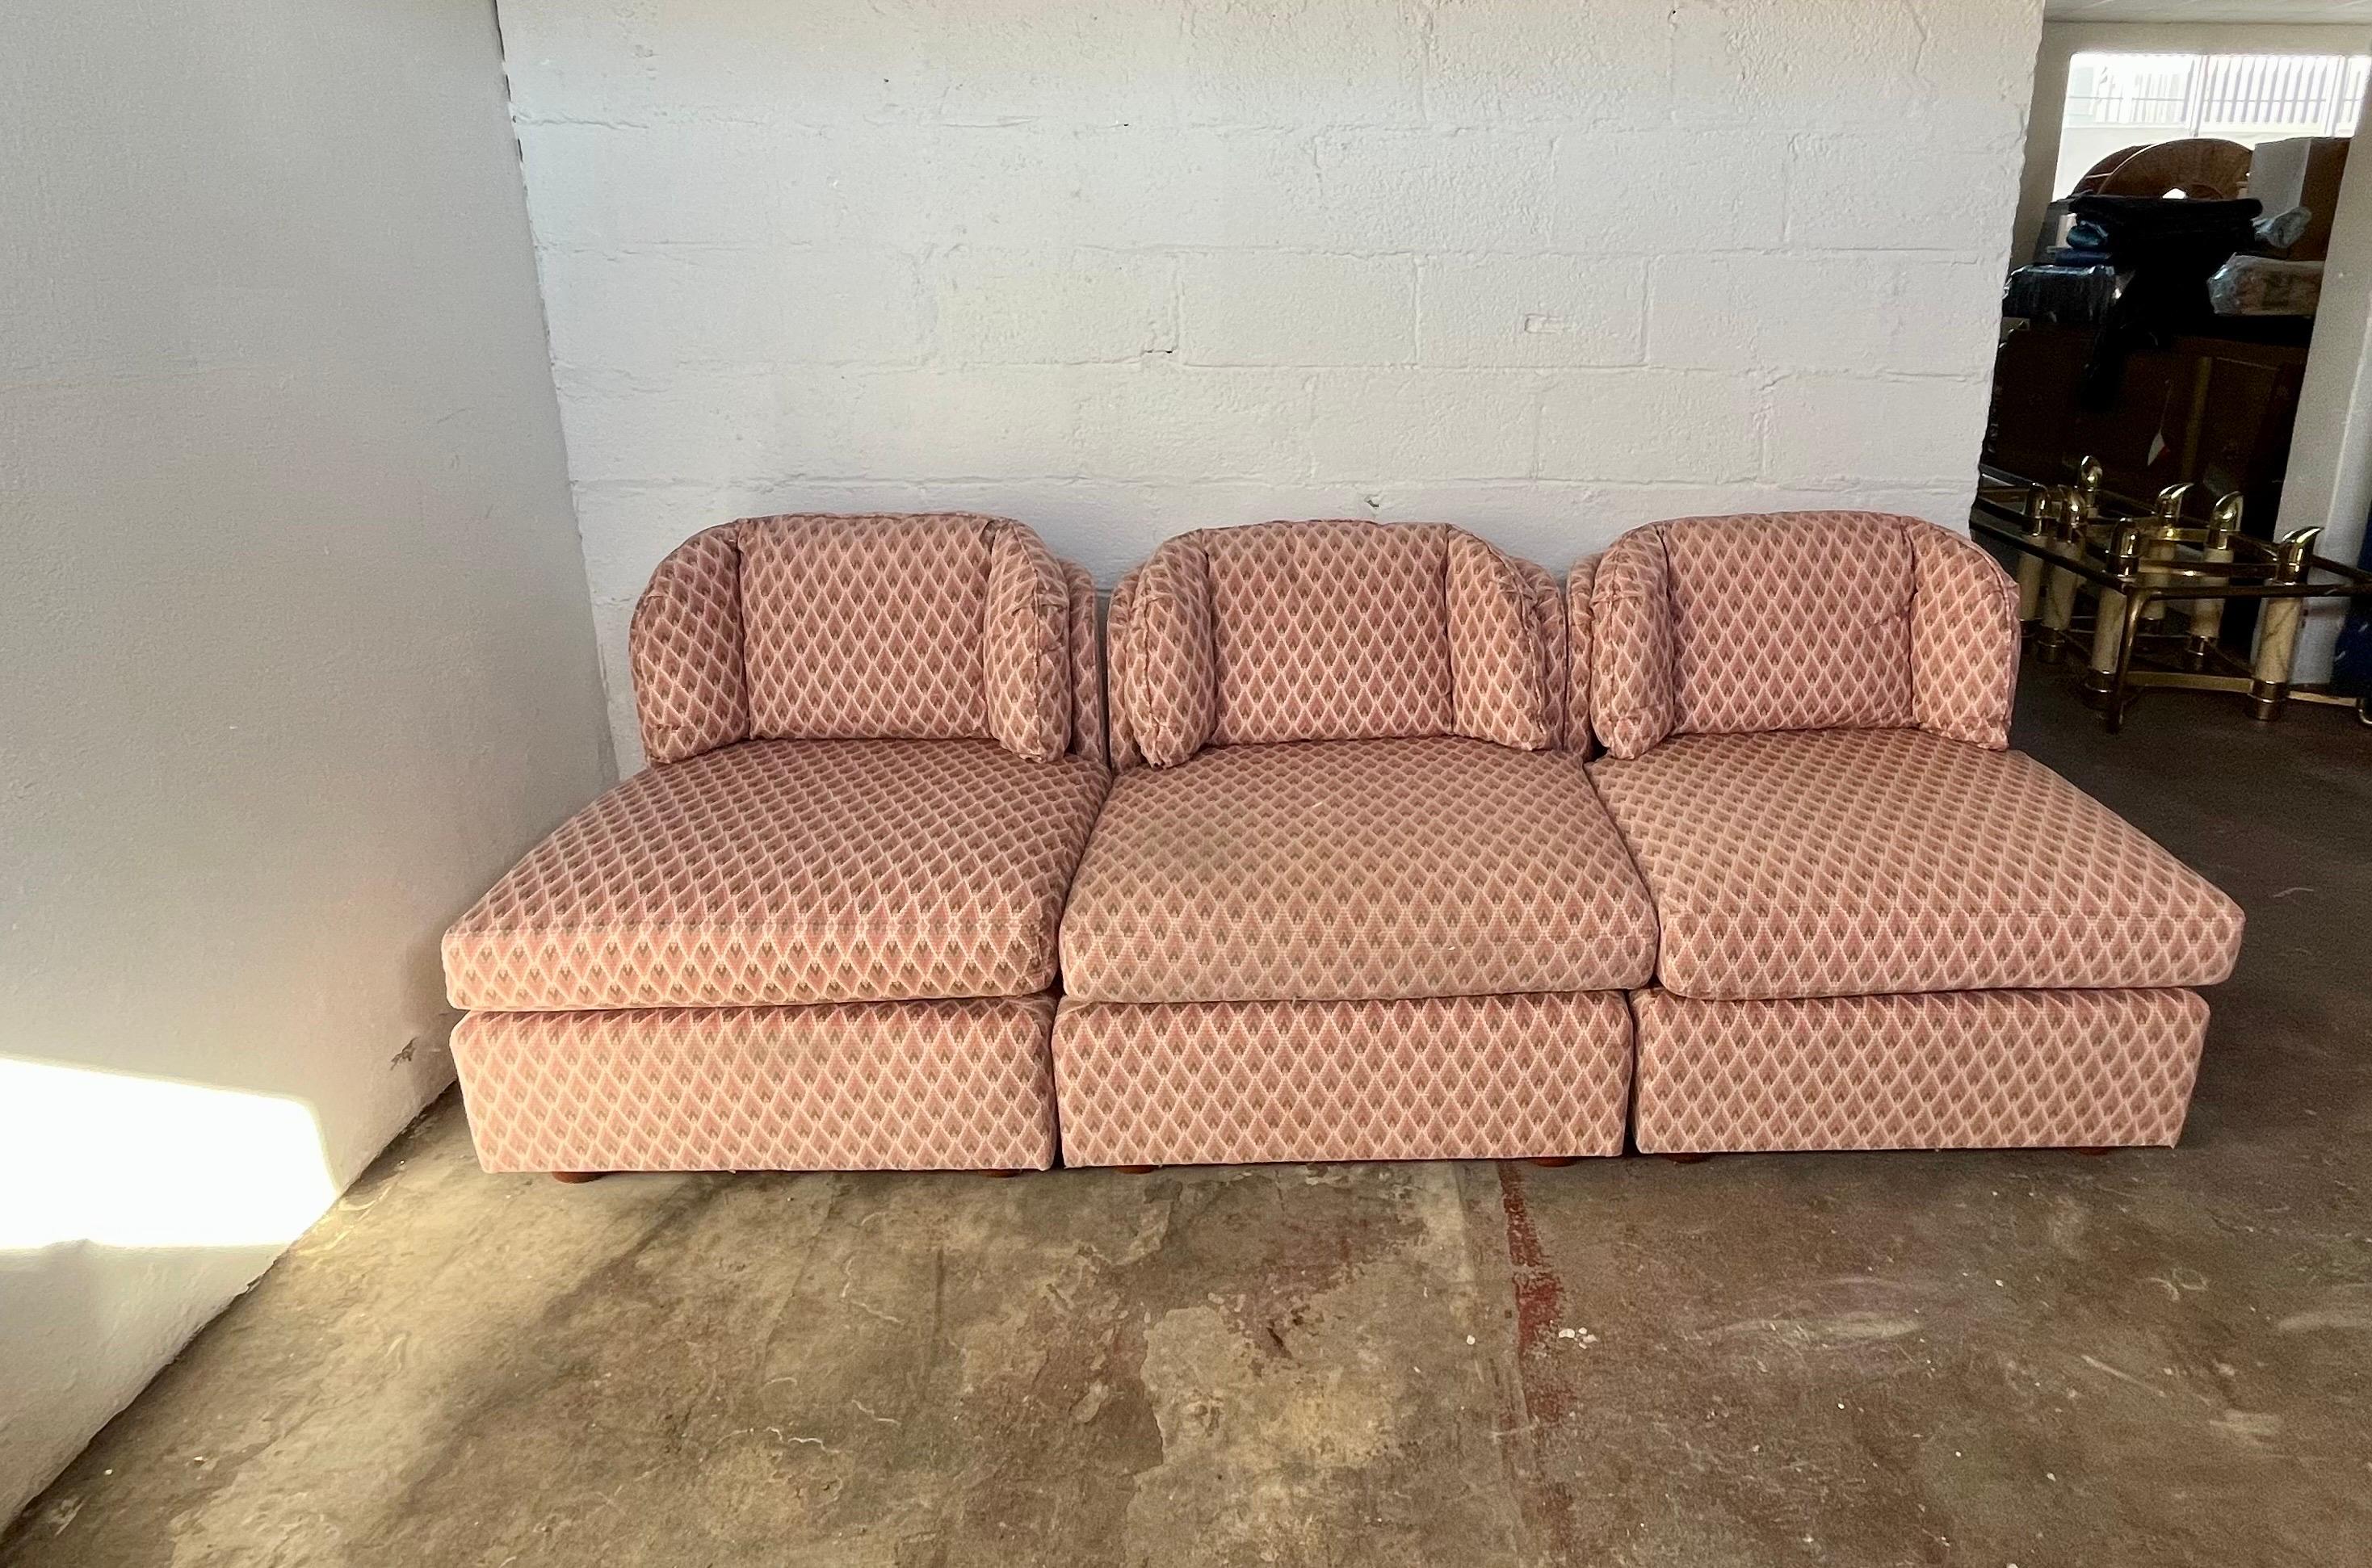 Amazing vintage Henredon Folio sectional sofa. Features an ornate fabric of mauves. 3 piece sectional for varied positioning.
Each section measures: 30”w, 32”d, 28”h
Curbside to NYC/Philly $400